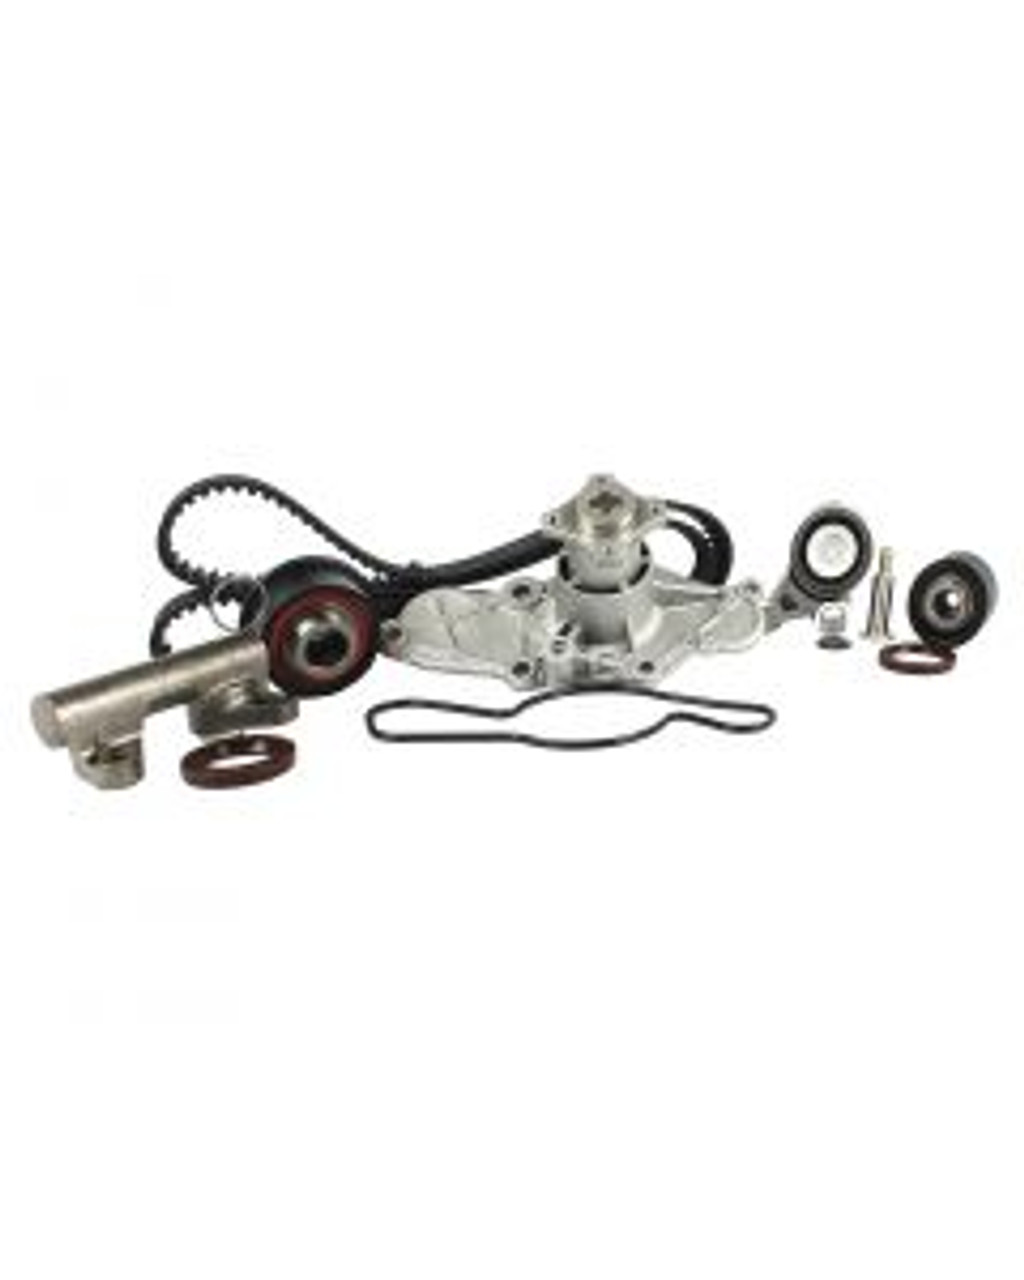 Timing Belt Kit with Water Pump 2.5L 1995 Mazda MX-6 - TBK455WP.23